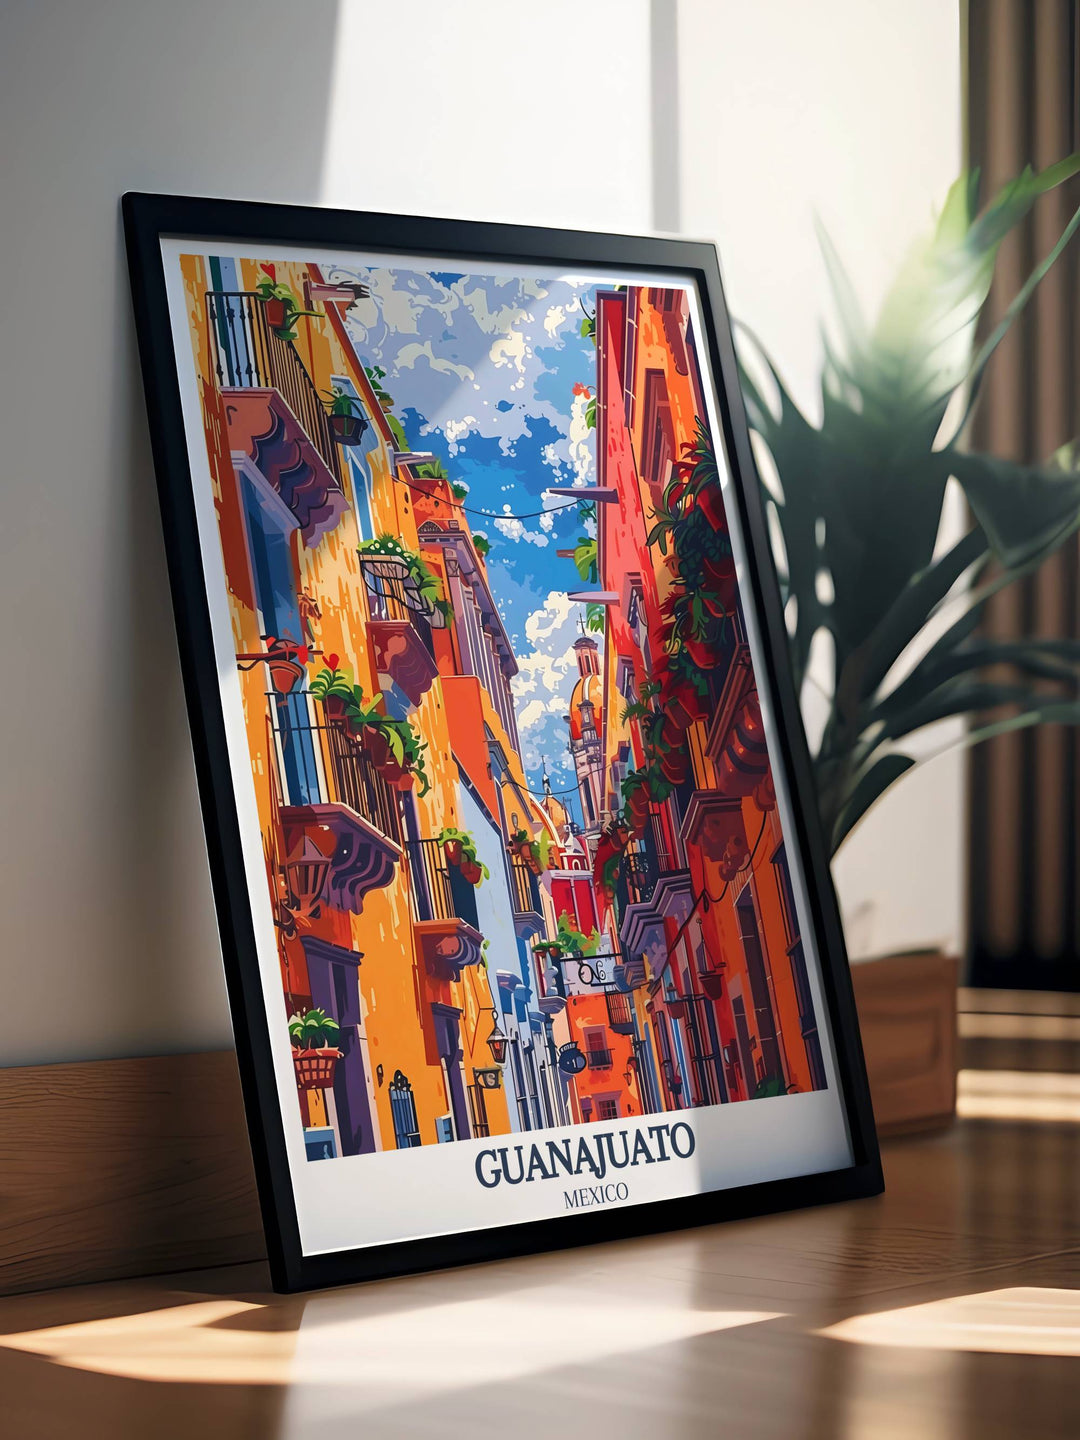 Guanajuato art print highlighting the citys lush gardens and public spaces, a peaceful retreat within the vibrant urban environment.